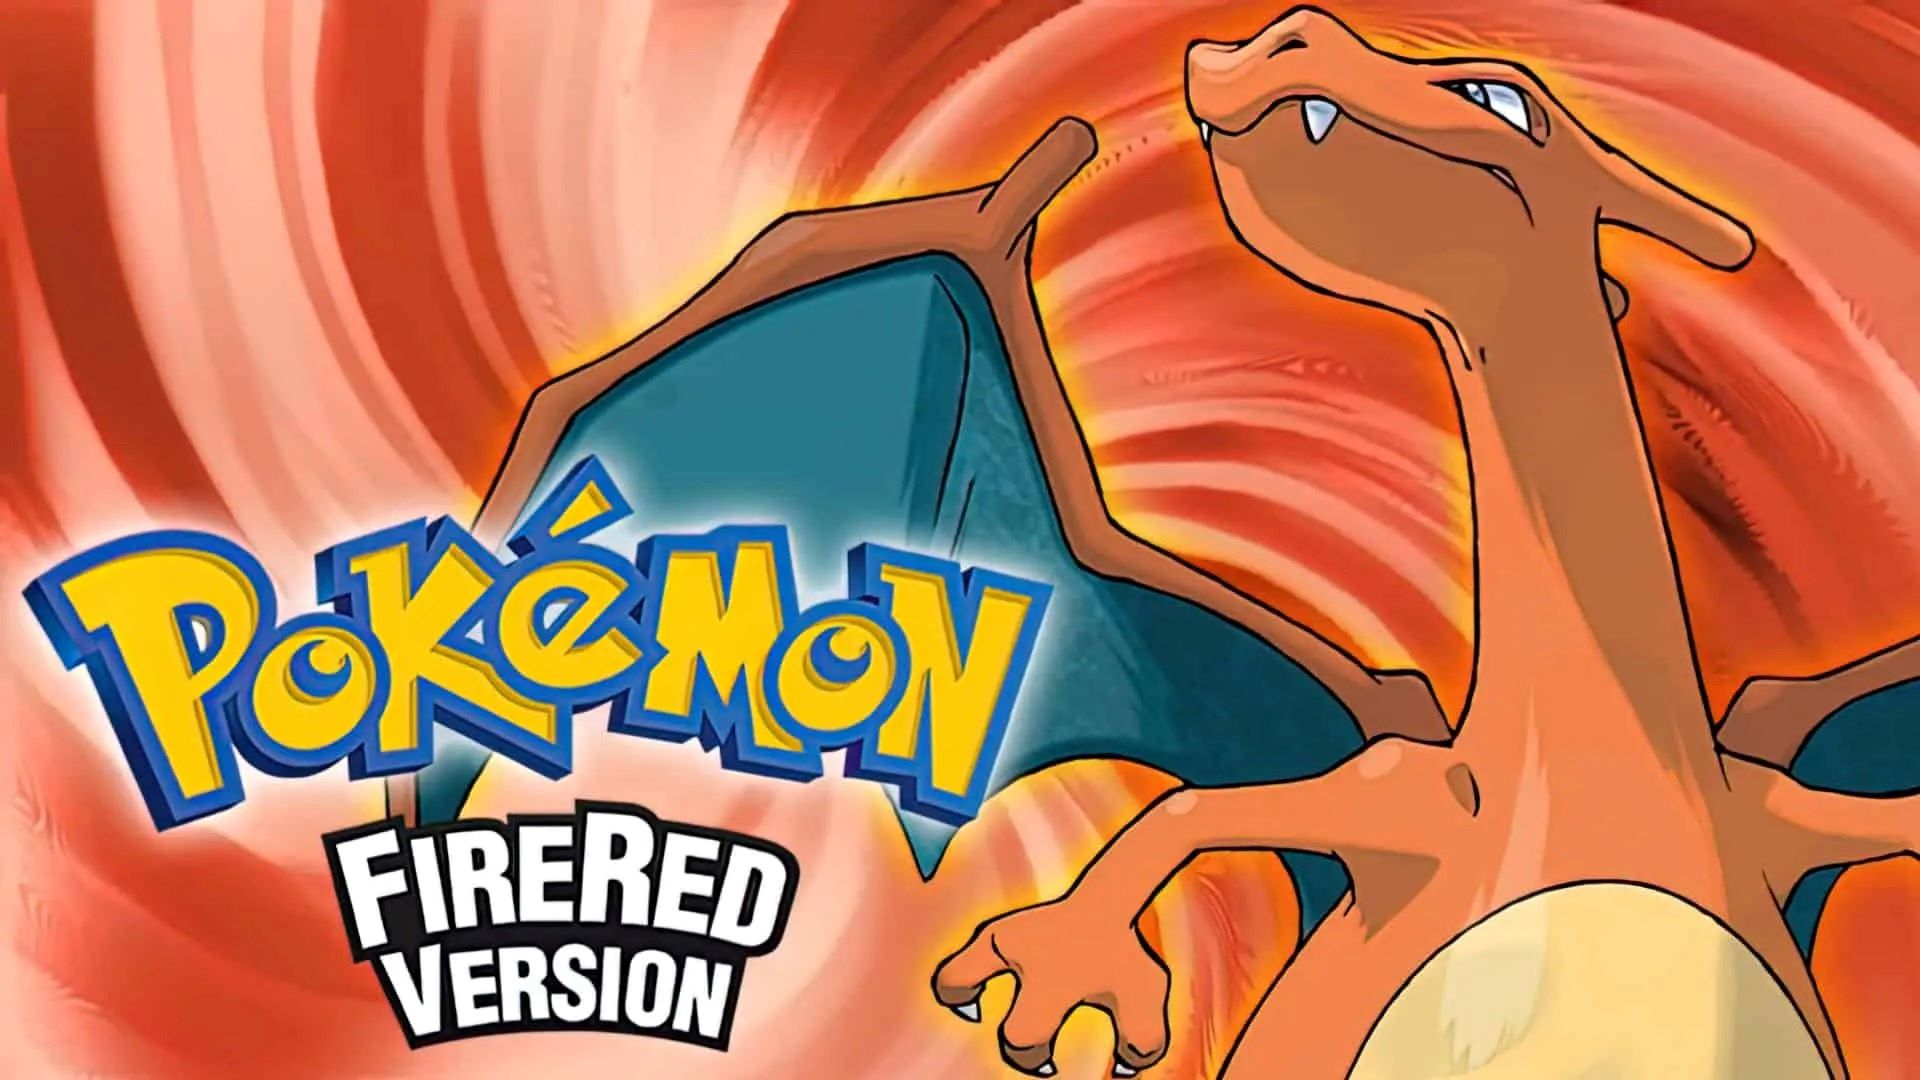 The Ultimate Fire Red Pokémon Dream Team Revealed – Unleash Their Power!